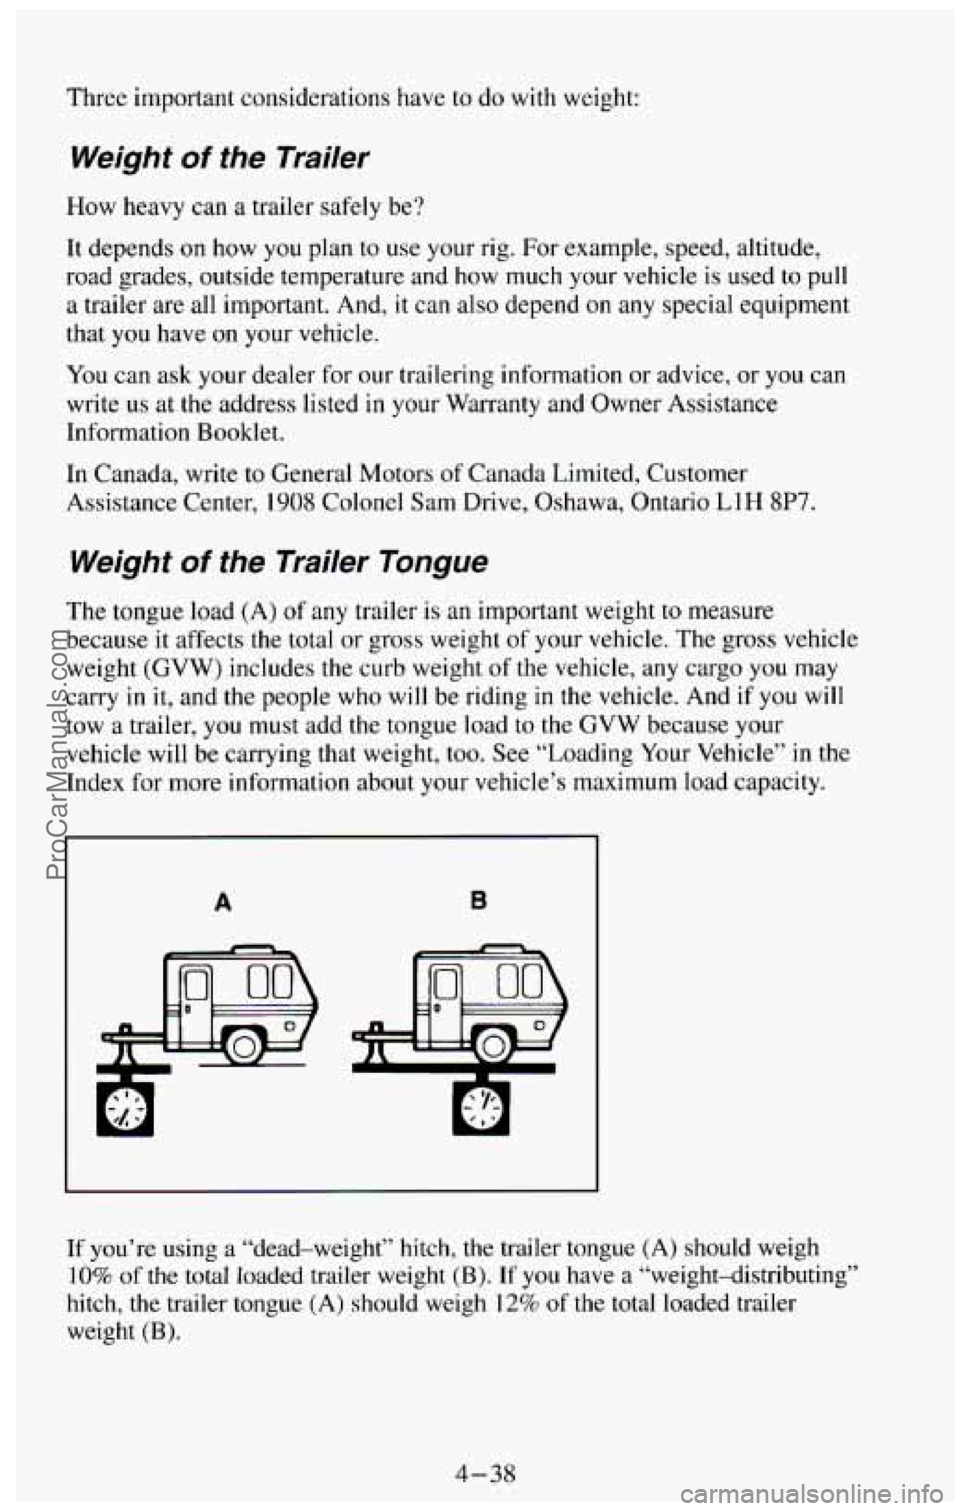 CHEVROLET SUBURBAN 1994  Owners Manual Three important  considerations  have to do with  weight: 
Weight of the  Trailer 
How  heavy  can a trailer  safely  be? 
It  depends  on  how 
you plan to use  your  rig.  For  example, speed,  alti